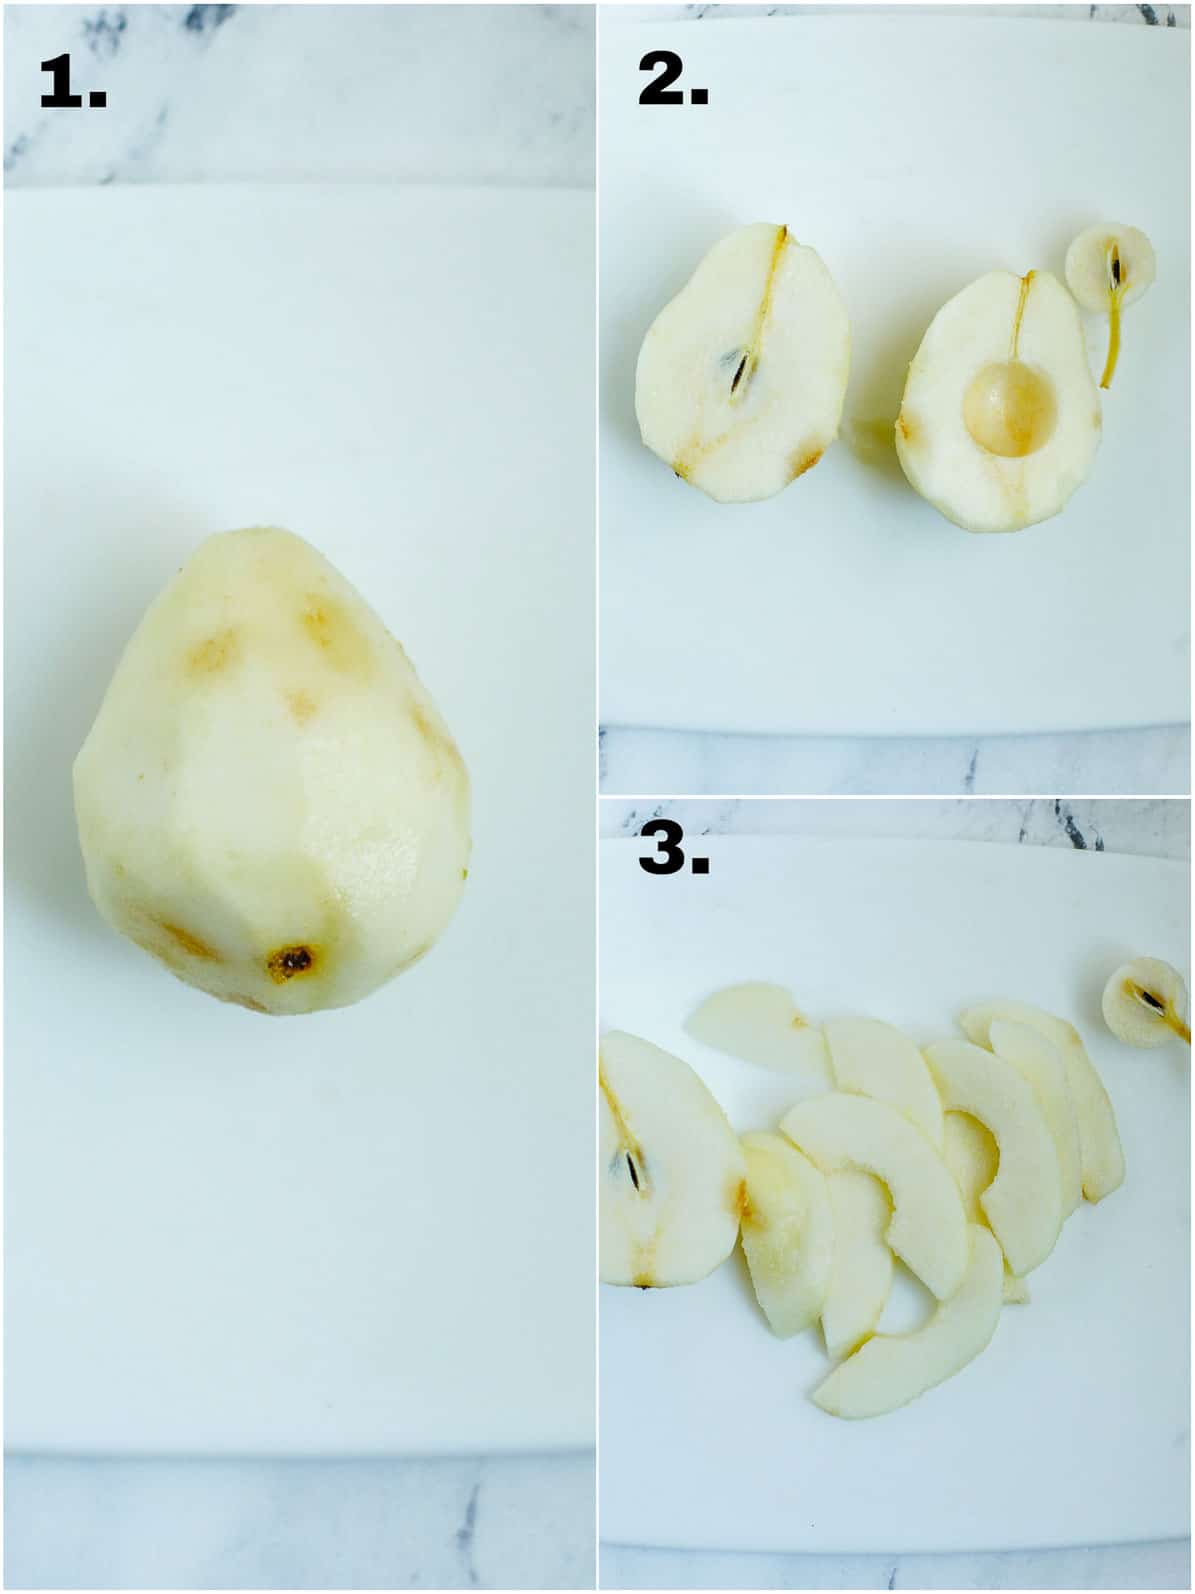 steps showing how to slice the pears.